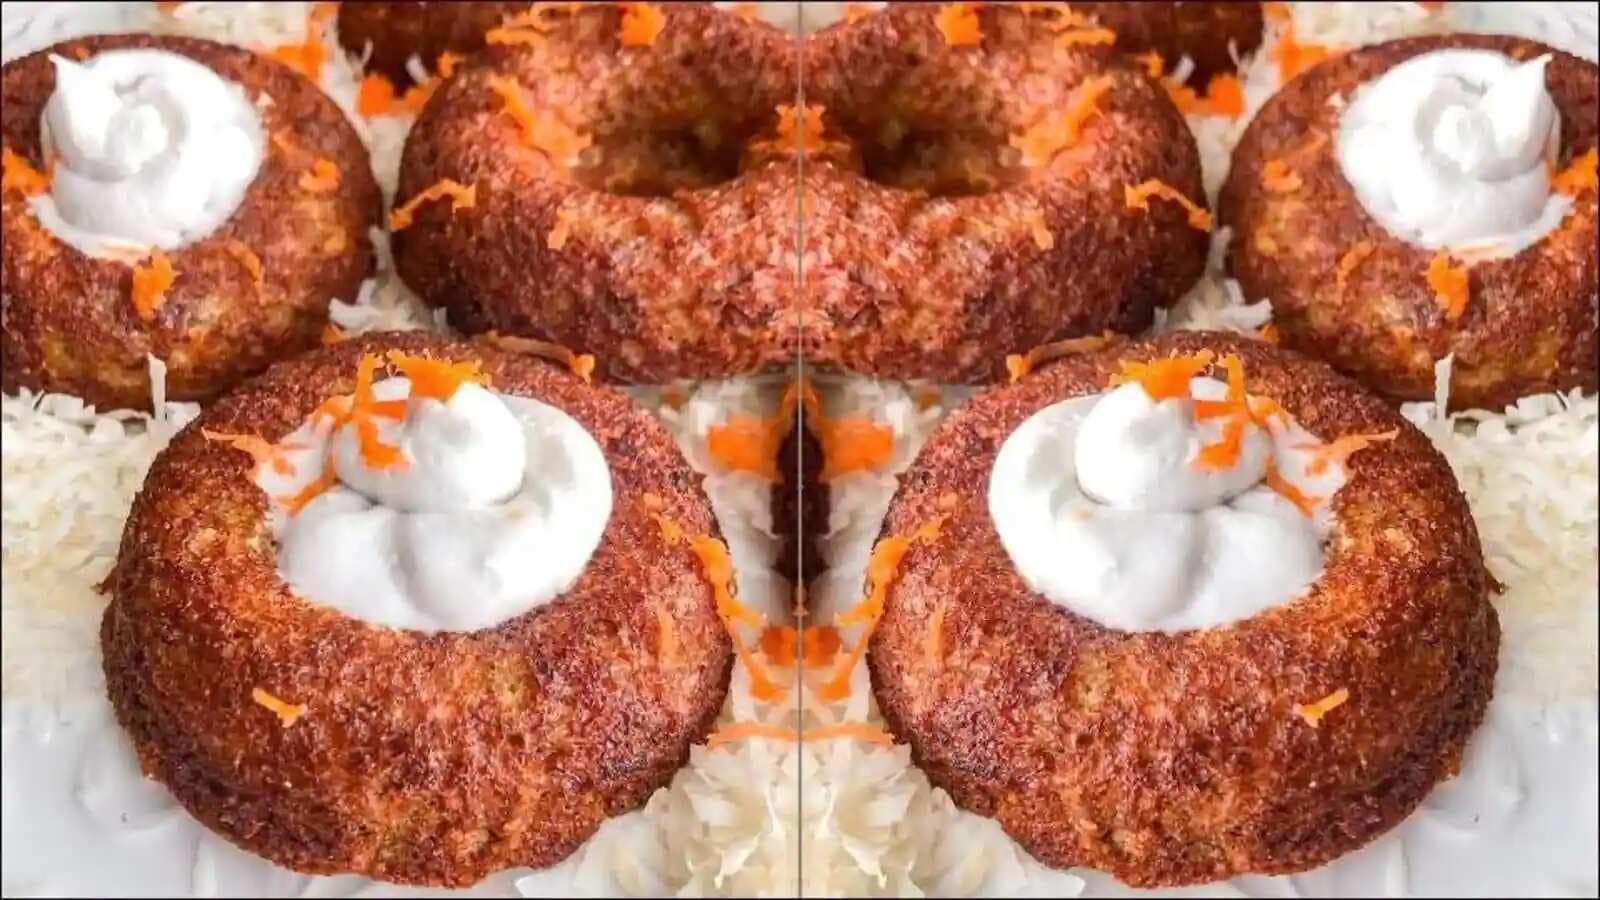 Recipe: Enjoy a dreamy and fluffy Easter with these Carrot Cake Donuts